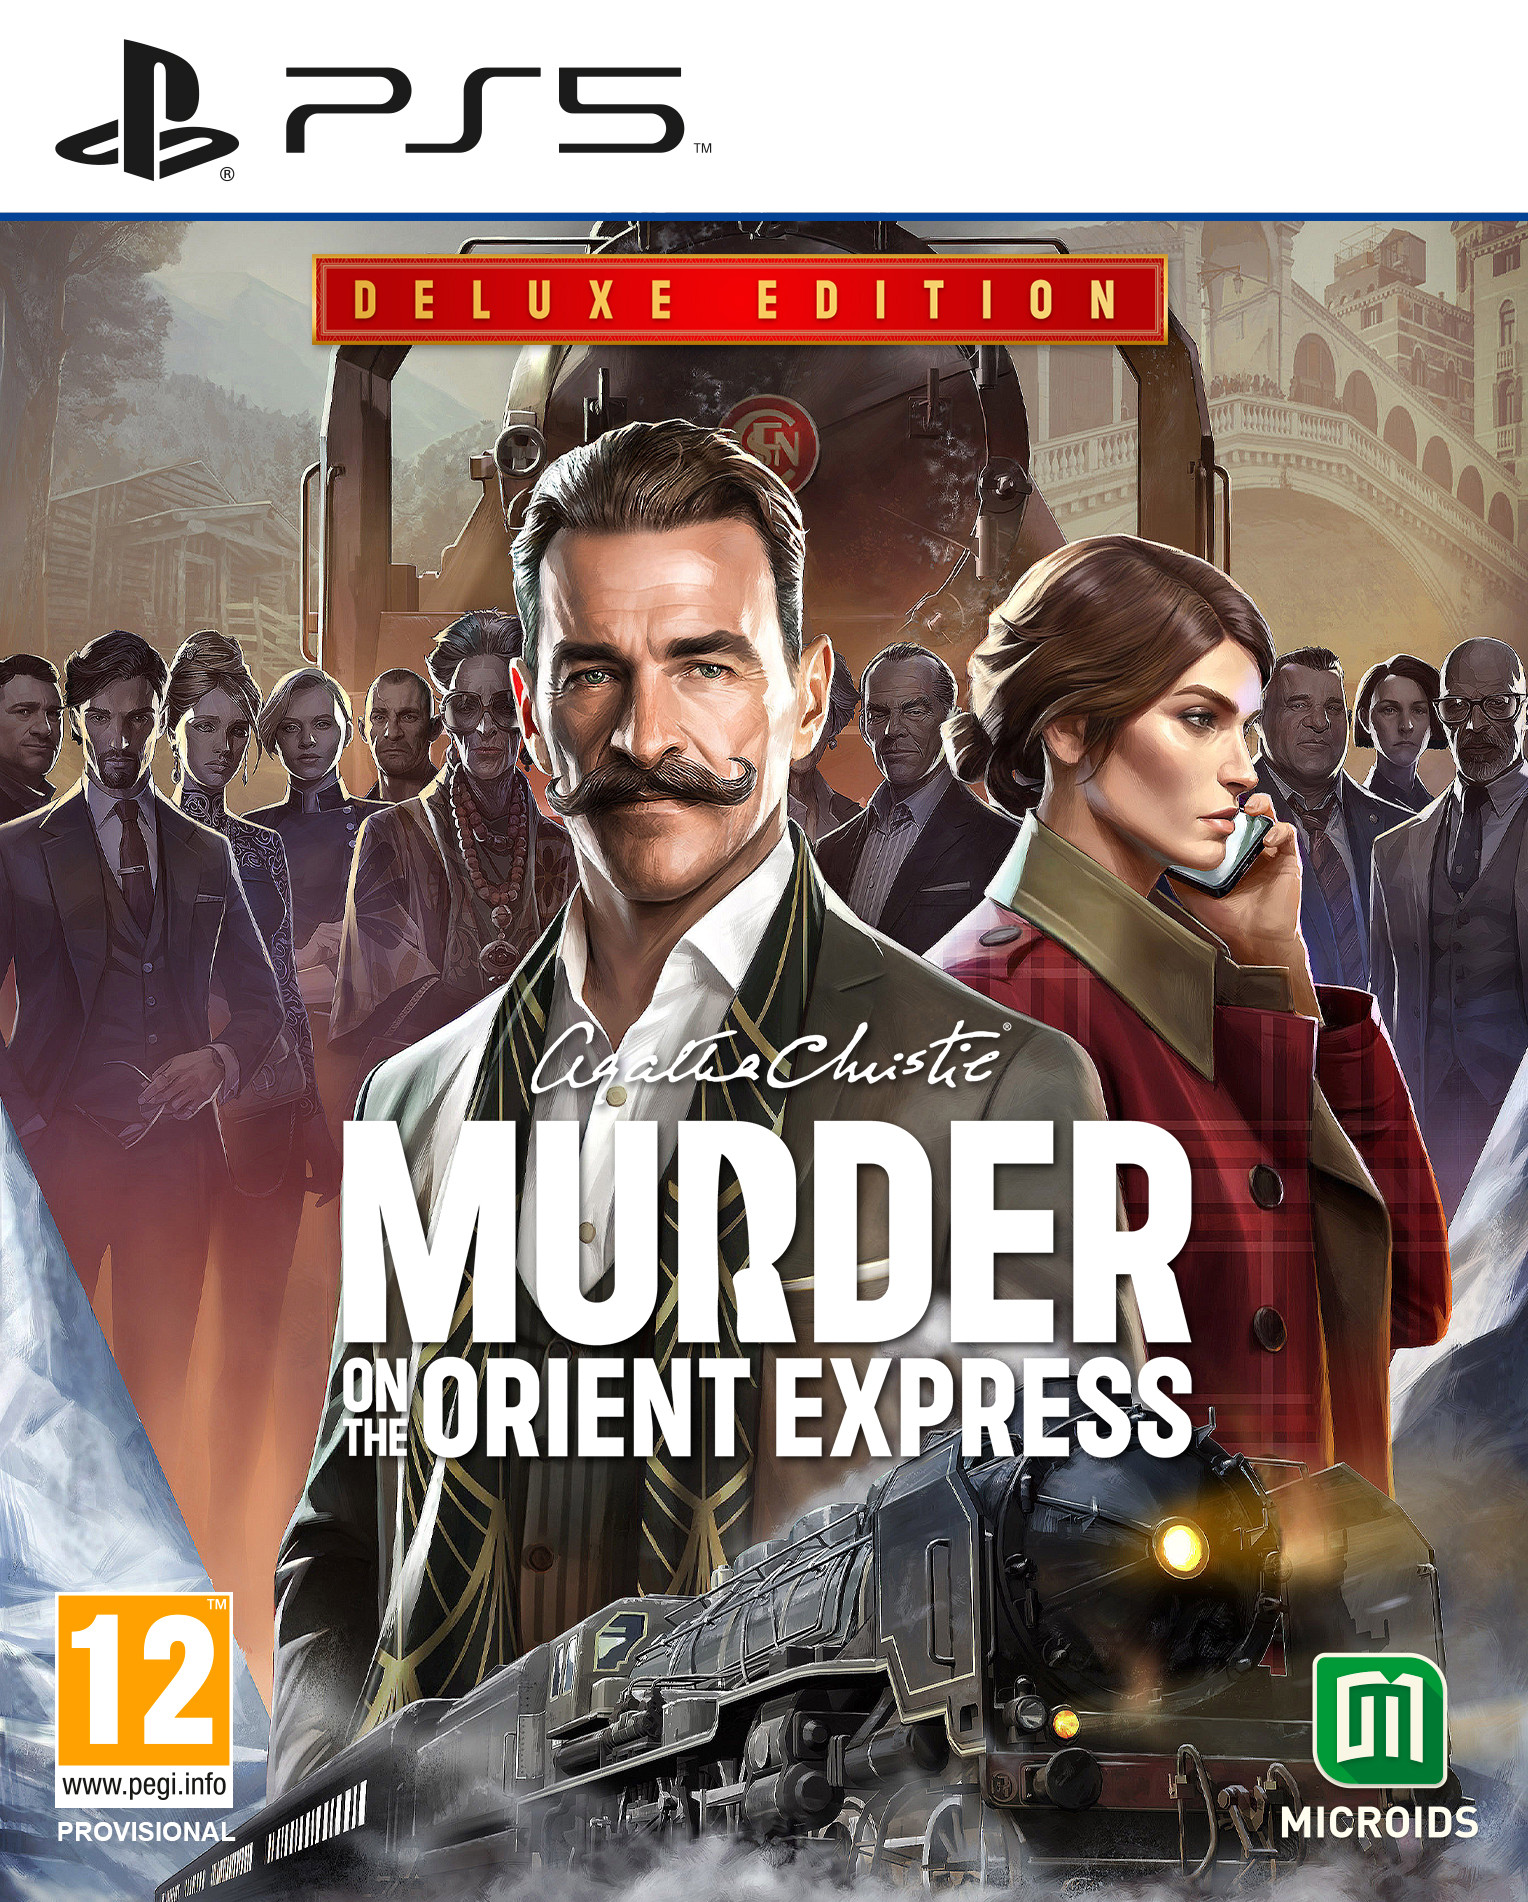 Agatha Christie: Murder on the Orient Express - Deluxe Edition (PS5), Microids